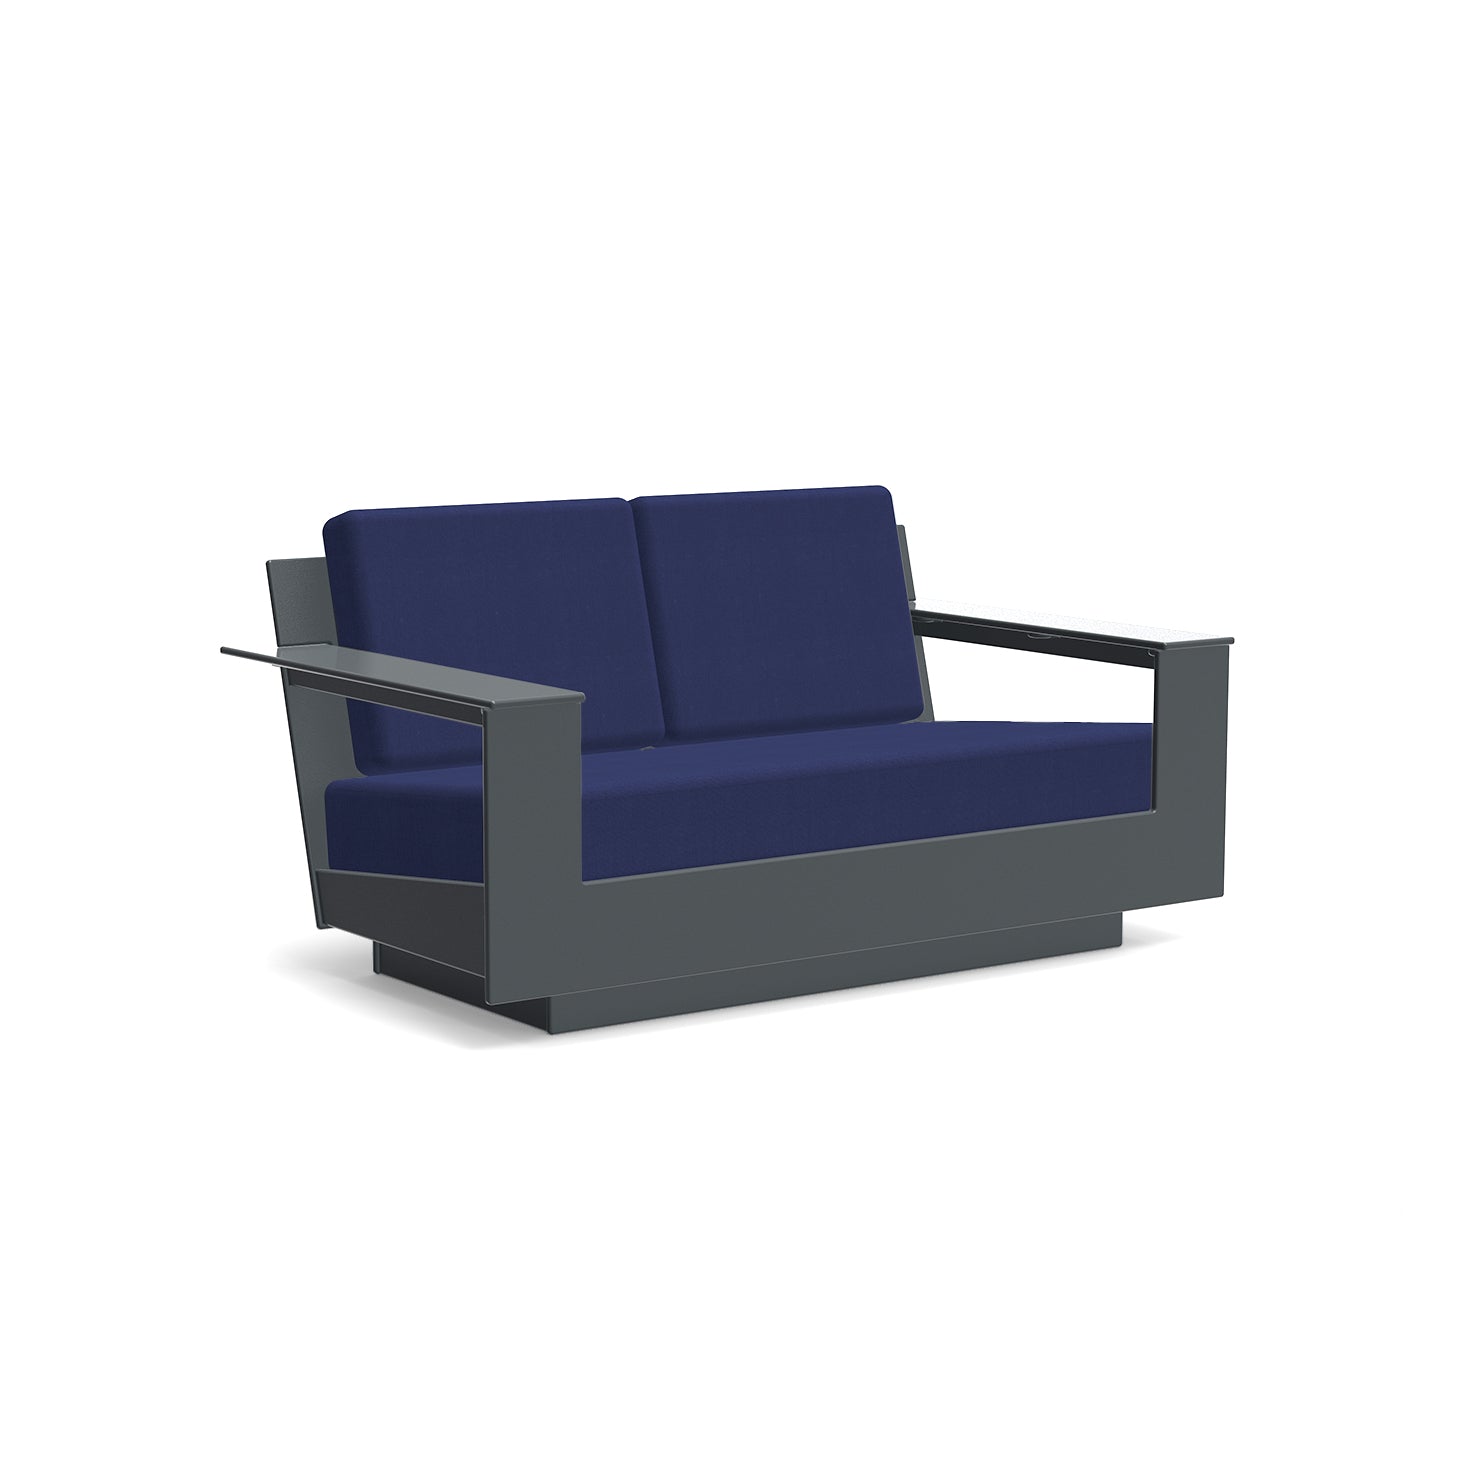 studio shot of nisswa loveseat in charcoal with navy cushion